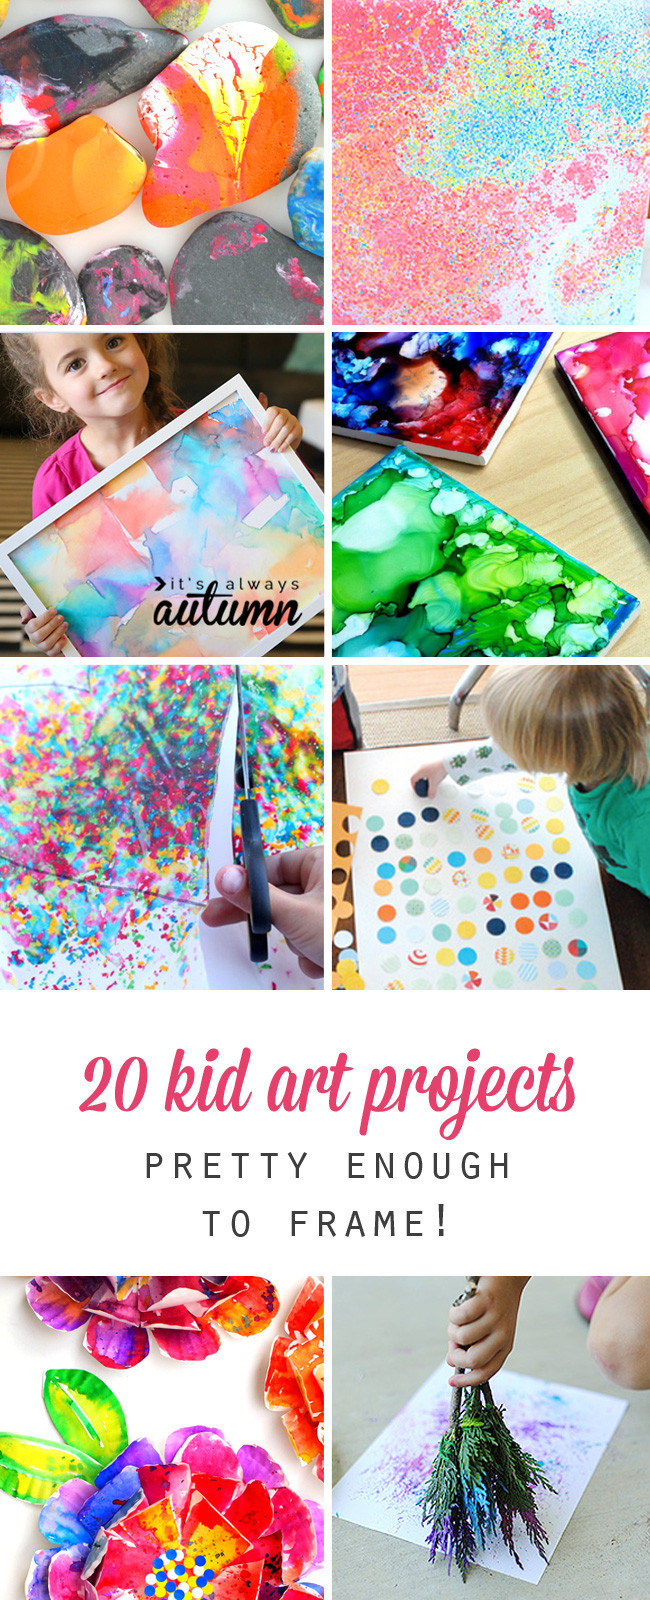 Art Project Ideas For Kids
 20 kid art projects pretty enough to frame It s Always